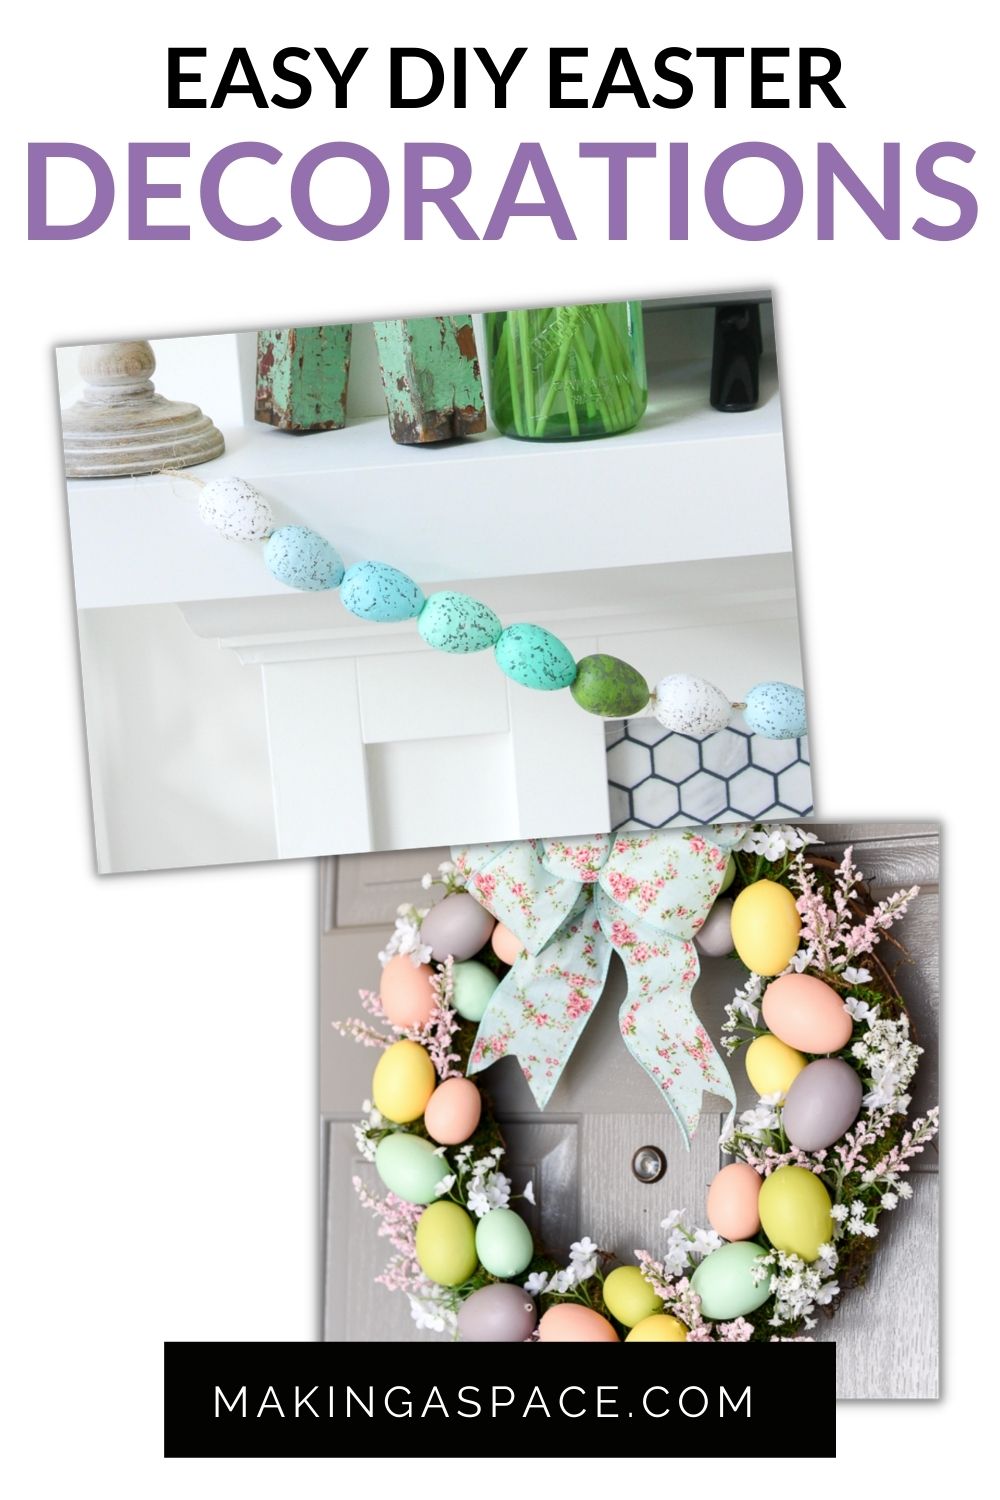 Easy DIY Easter decorations for a house